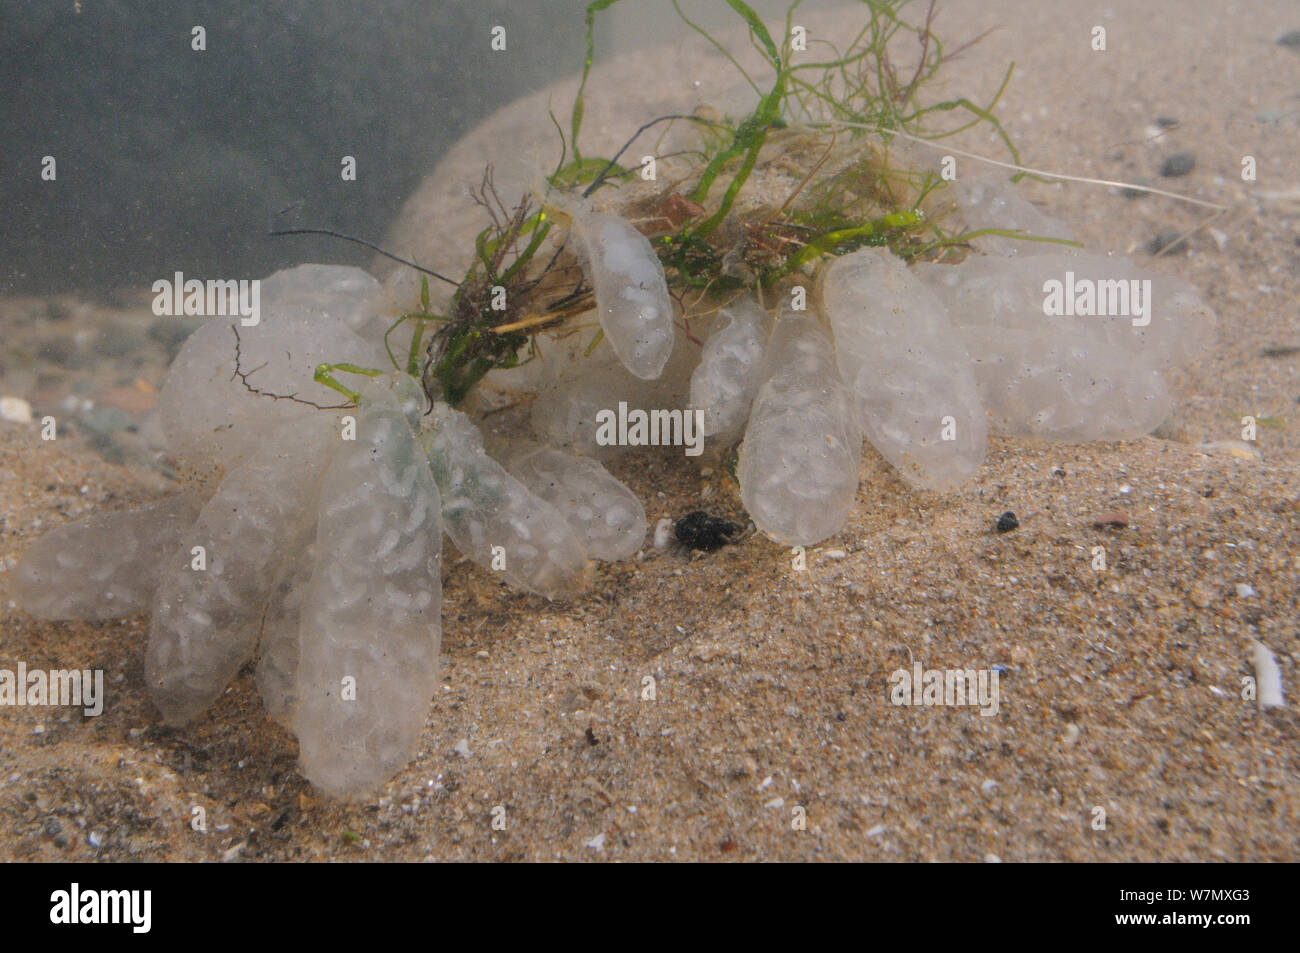 Common European squid egg sacs (Alloteuthis / Loligo subulata), with developing embryos visible, in rockpool after being washed ashore, St.Bees, Cumbria, UK, July. Stock Photo